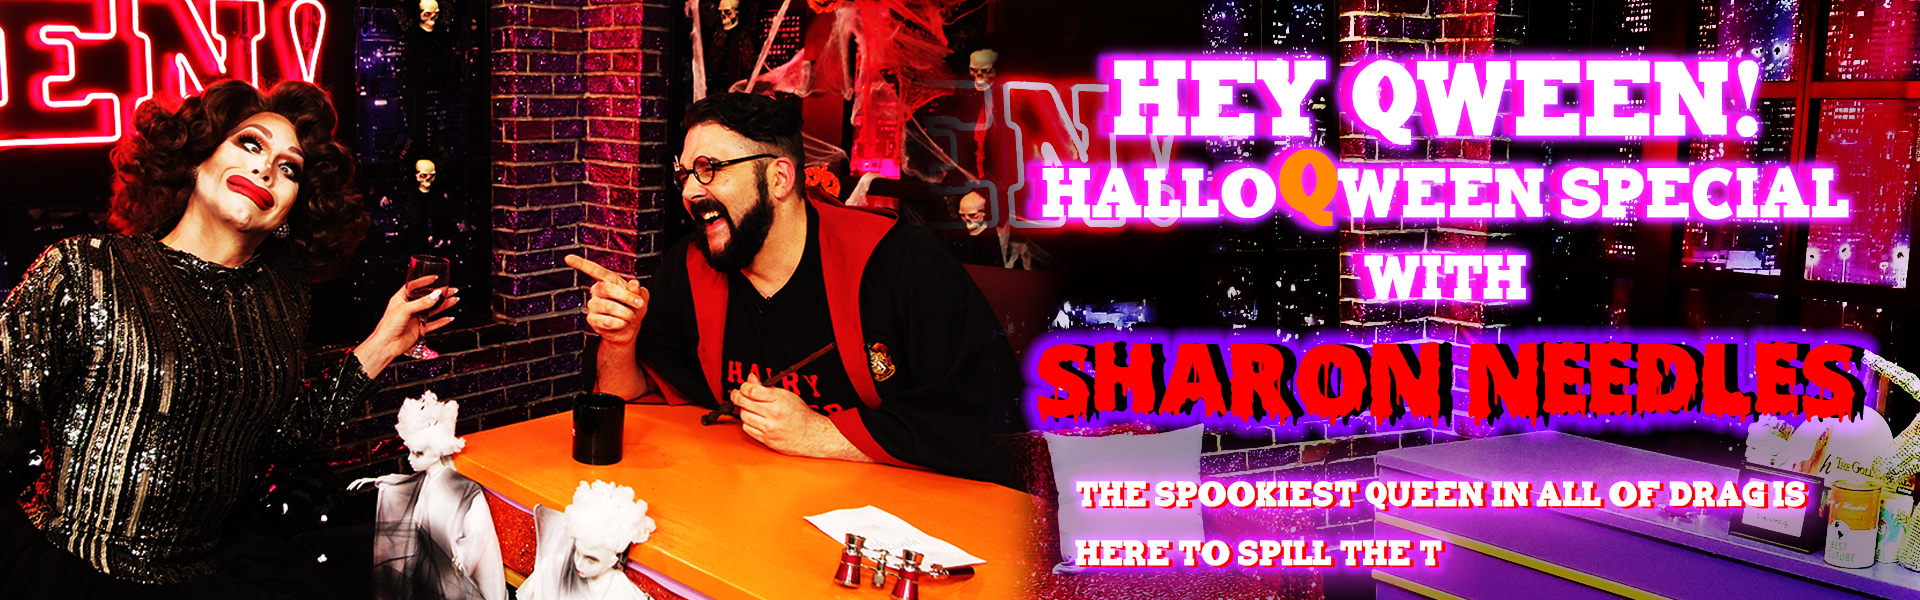 Hey Qween! HalloQween Special with Sharon Needles